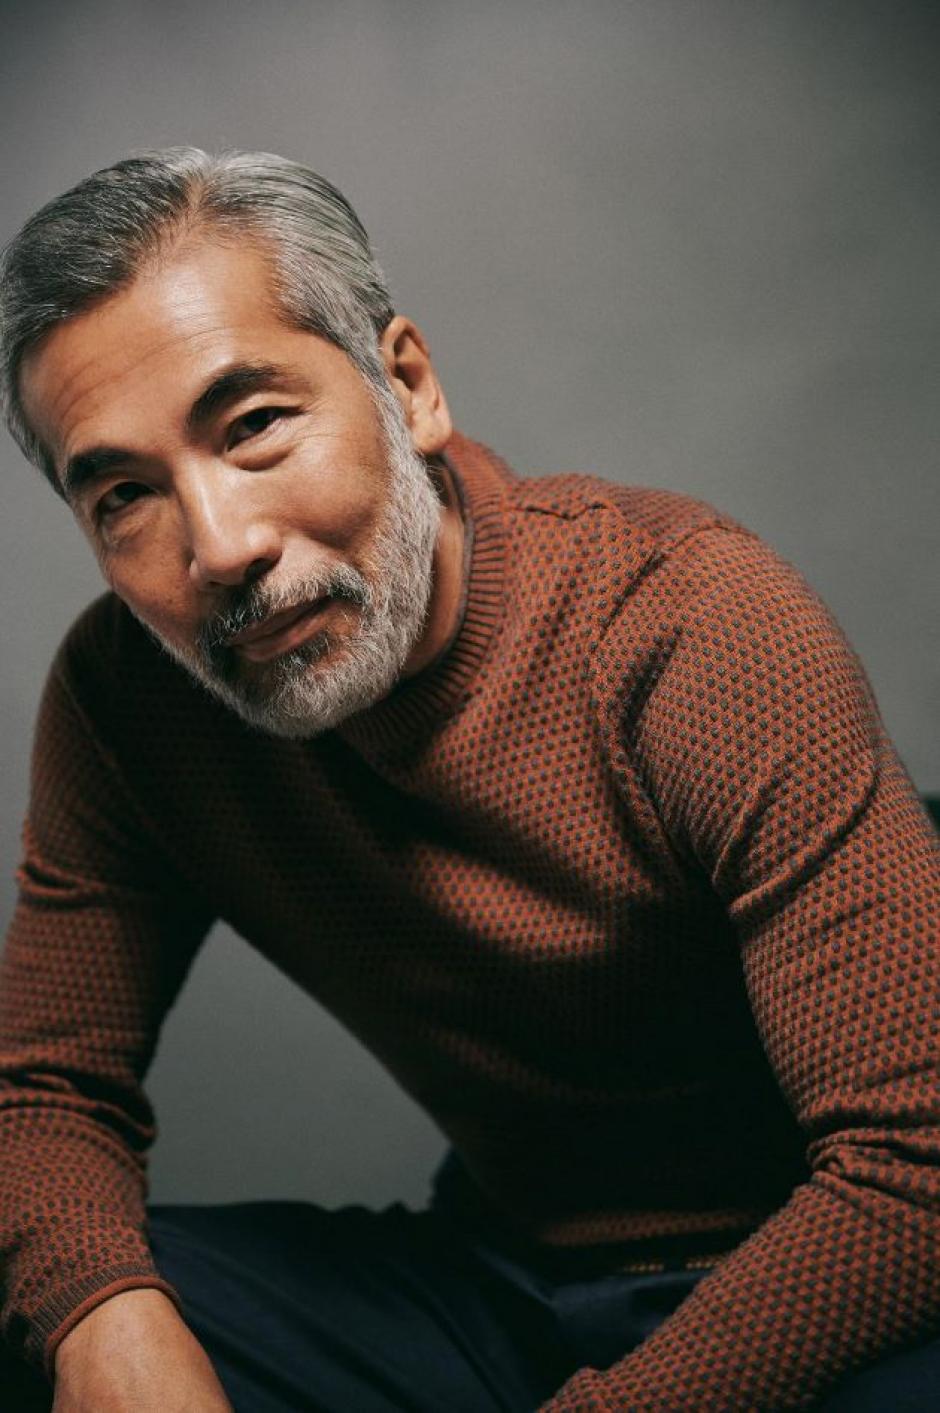 Hiro Kanagawa is wearing a rust coloured sweater. He is seated, and leaning forward, looking into the camera.